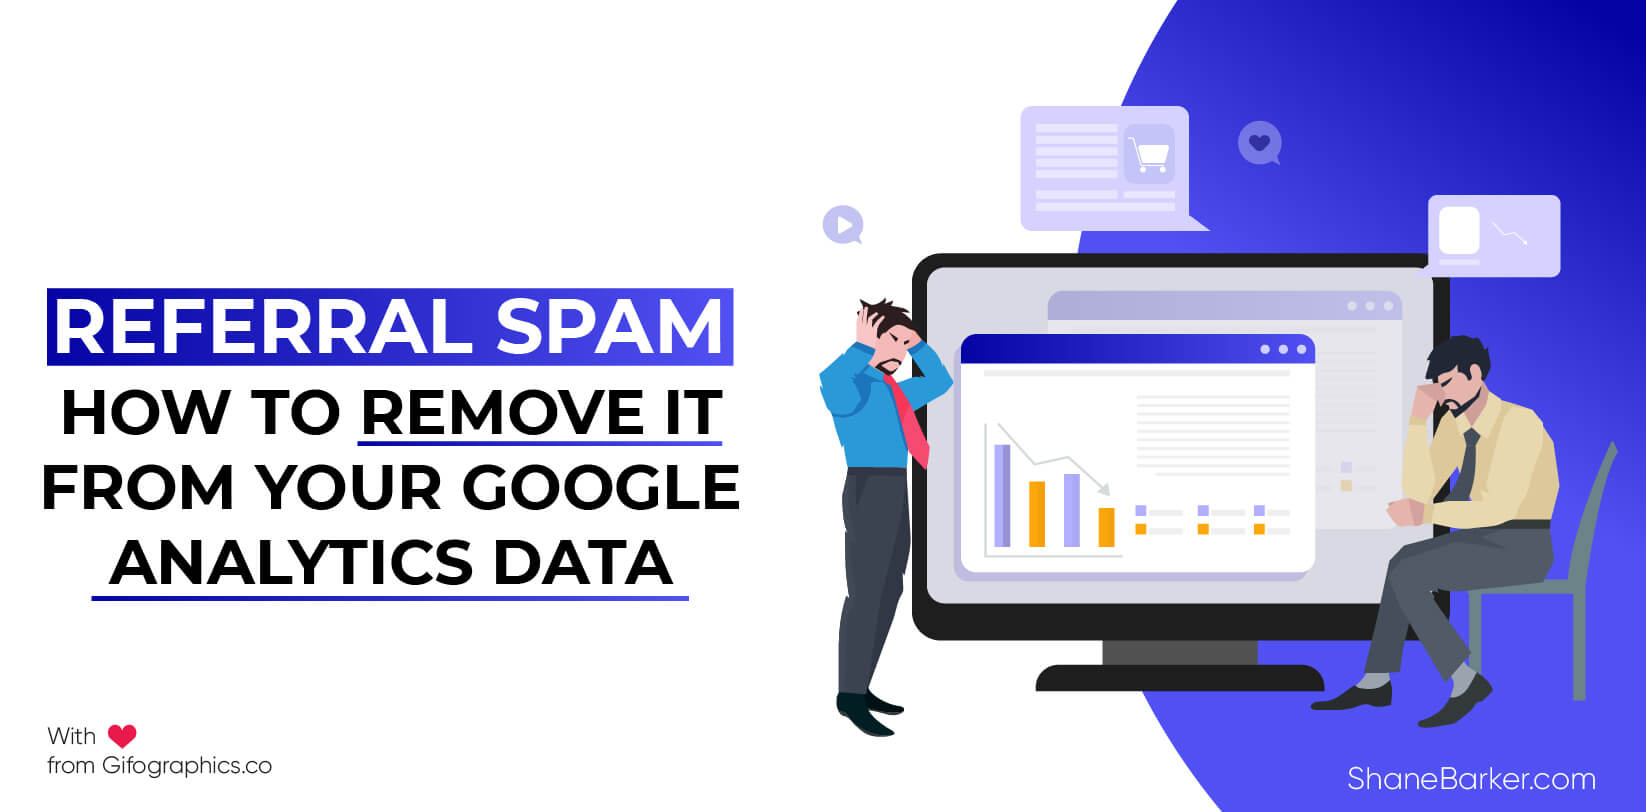 Referral Spam: How to Remove It From Your Google Analytics Data